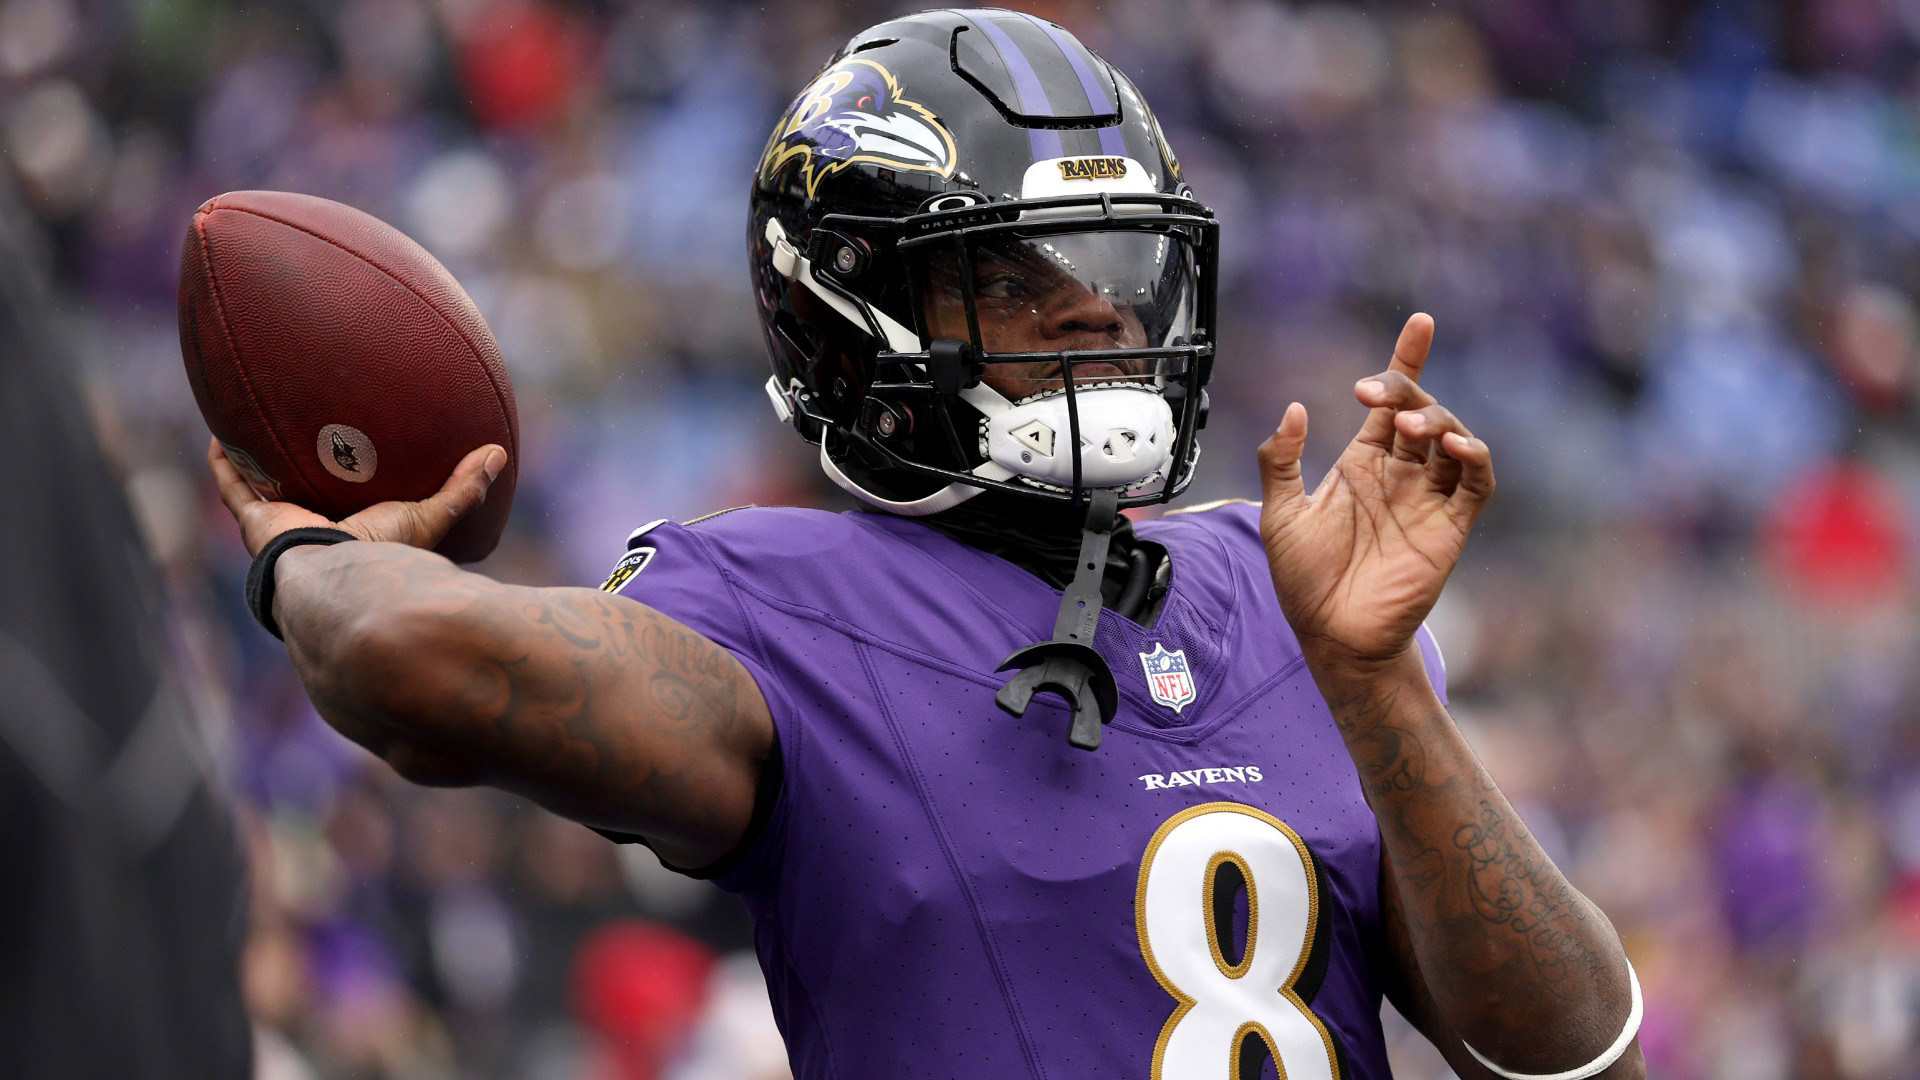 Lamar Jackson completes rare pass to himself, picks up first down in ...